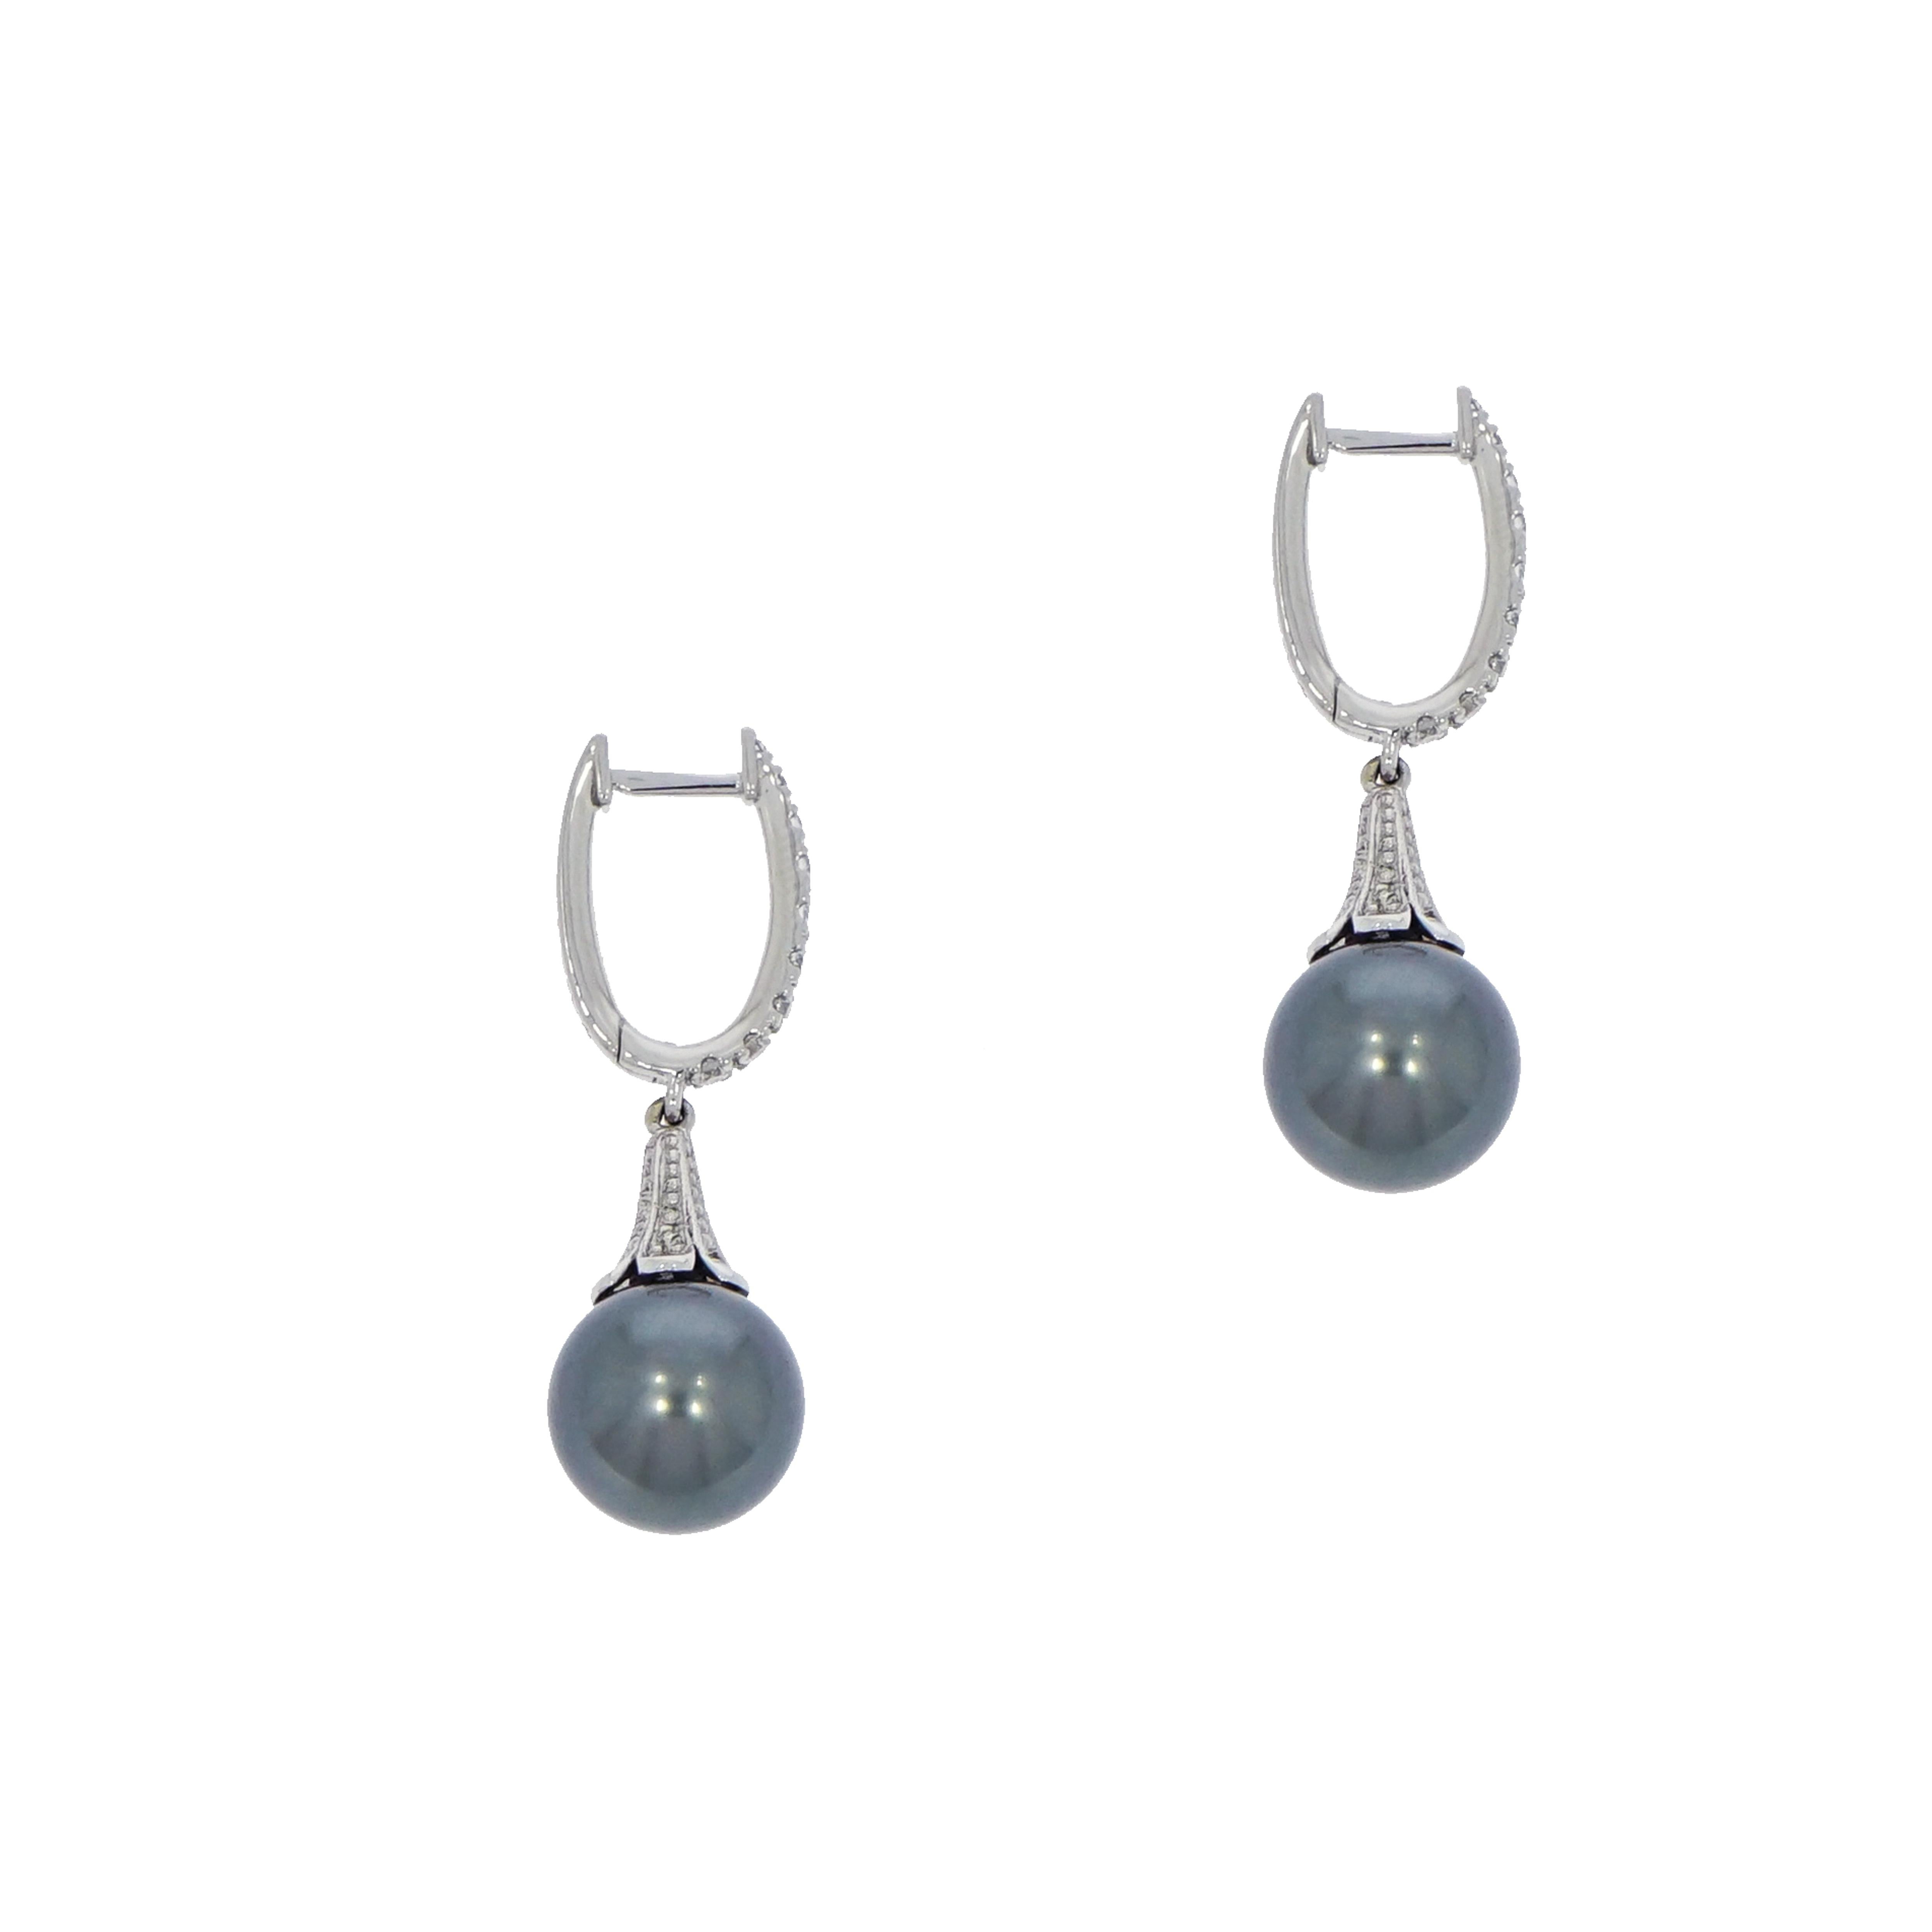 
Handcrafted in Platinum and adorned with 30 round diamonds totaling approximately 0.57 ct. this beautiful Tahitian Pearl Drop Earrings becomes an eye-catching and wearable heirloom-quality jewelry featuring a pair of 10.5 -11mm Peacock Tahitian